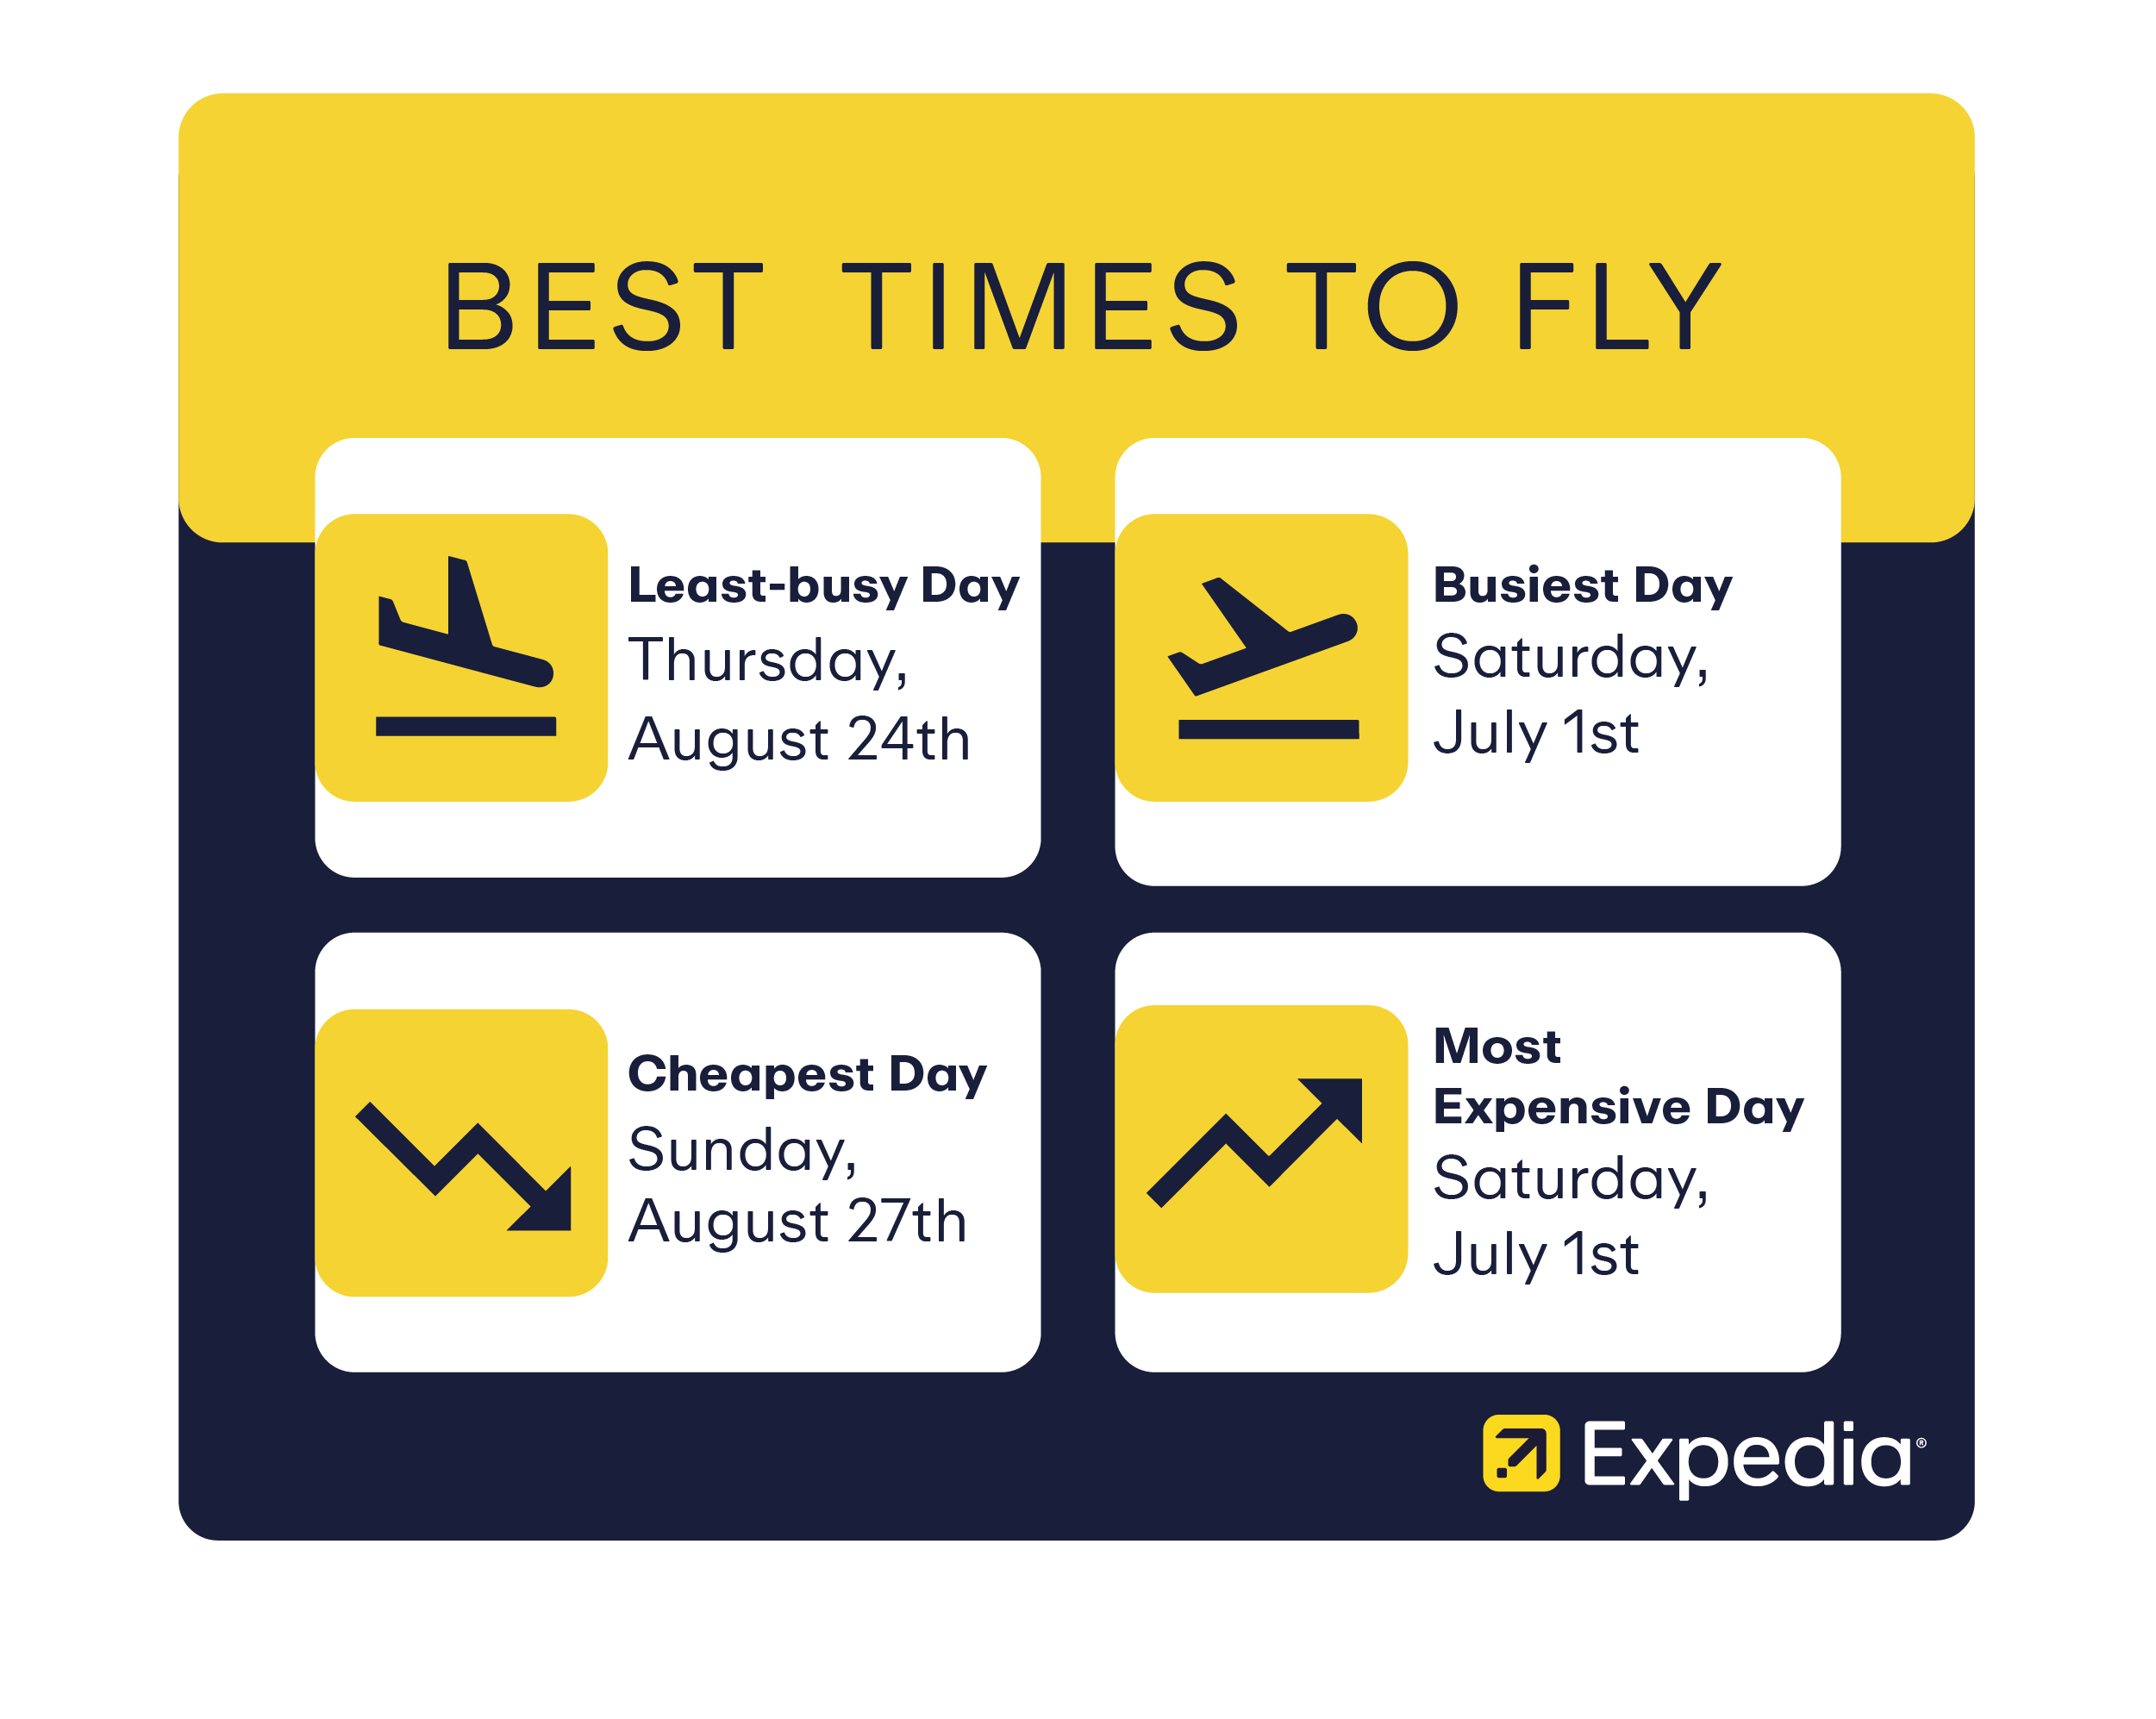 *Based on Expedia flight demand as of April 1, 2023, for travel during June to August